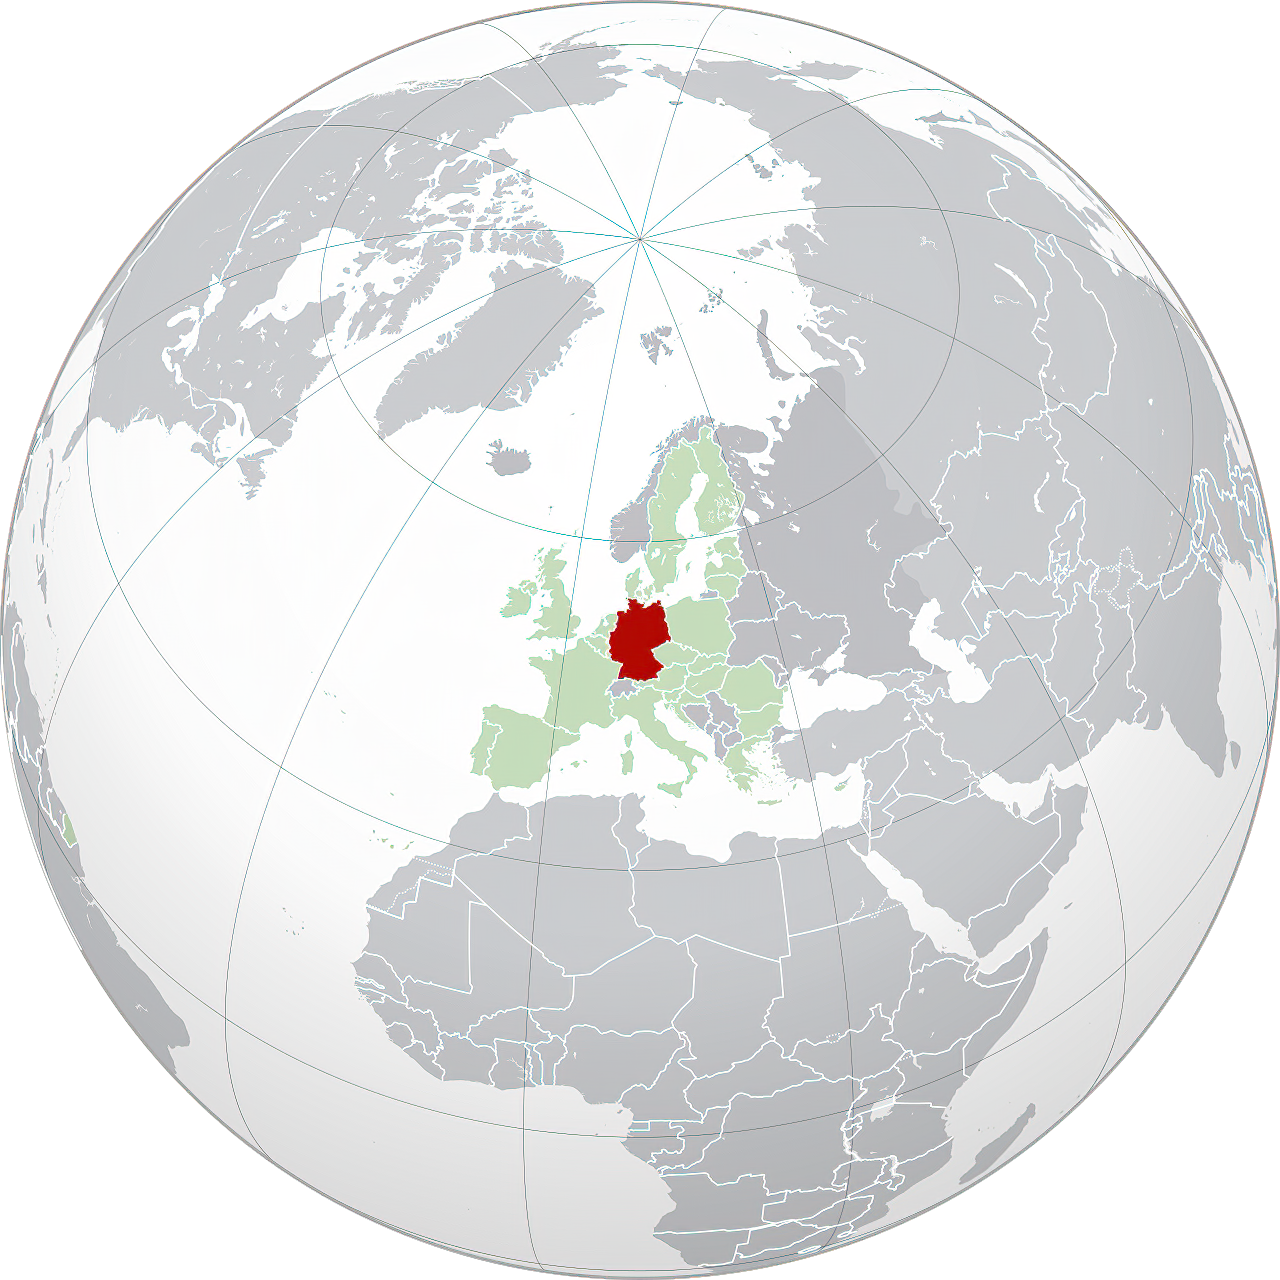 Germany | Germany (red) is located in Europe | Wikimedia Commons



